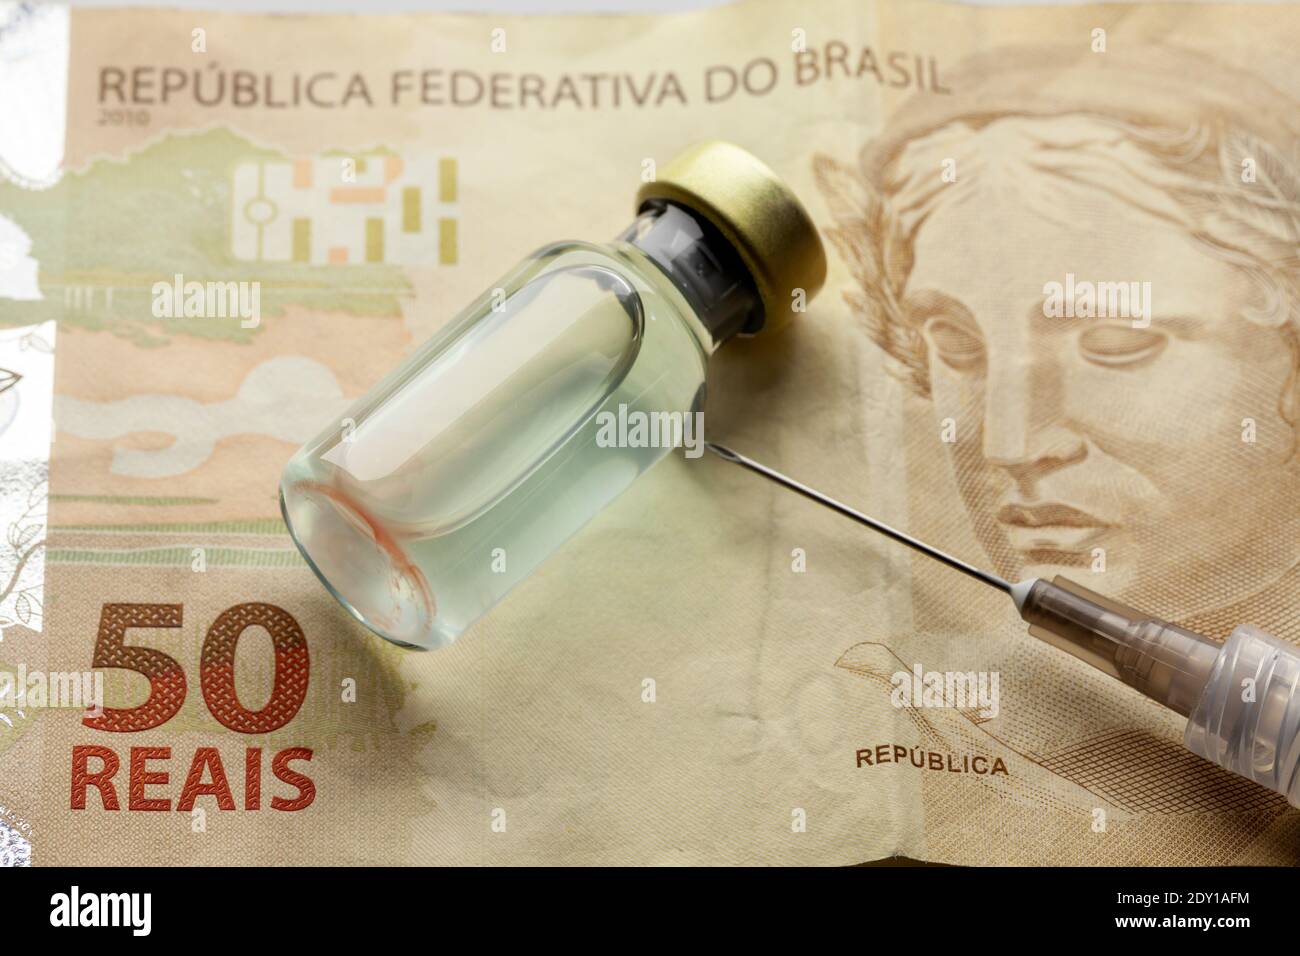 Glass vaccine bottle with liquid and syringe needle over a brazilian '50 Reais' bank note from close Stock Photo